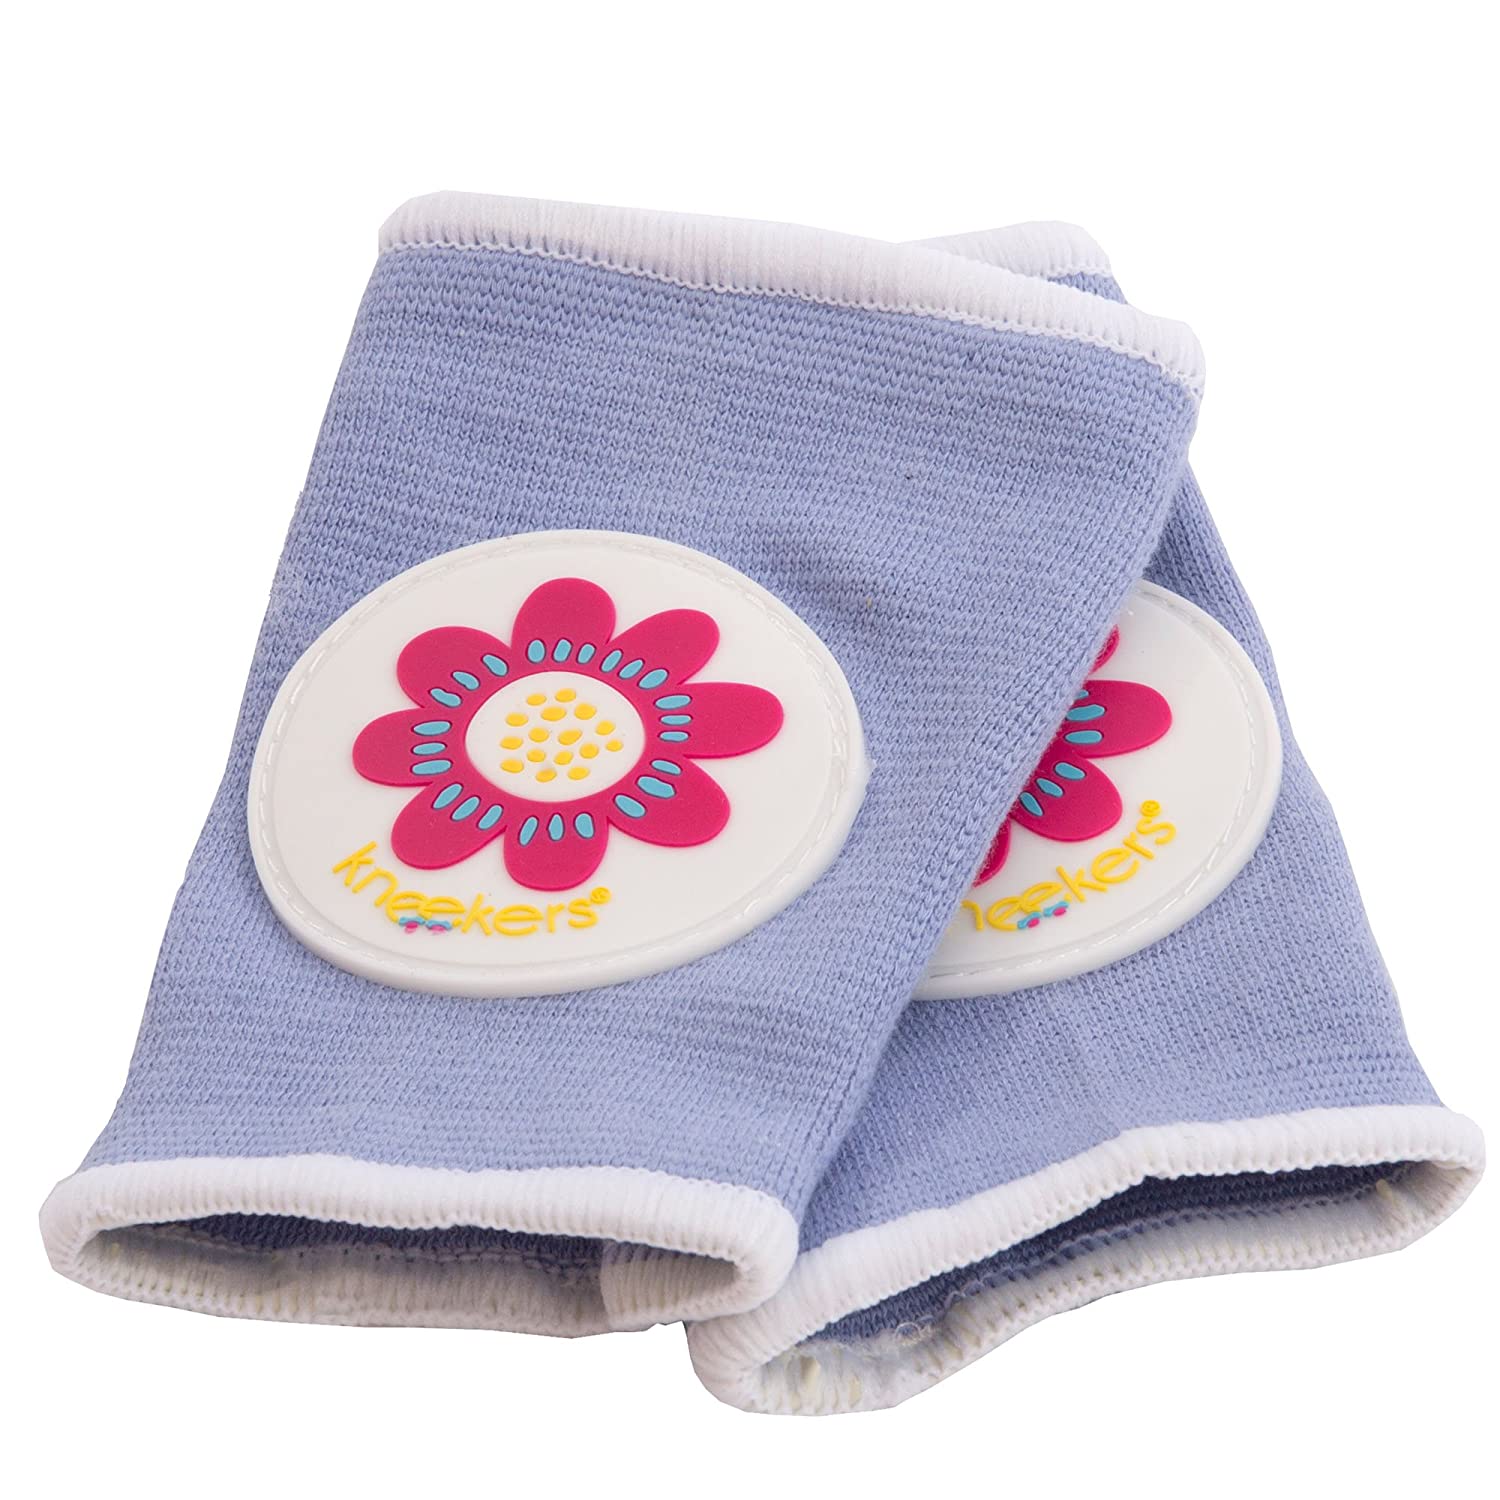 Top 9 Best Baby Knee Pads for Crawling Reviews in 2023 3